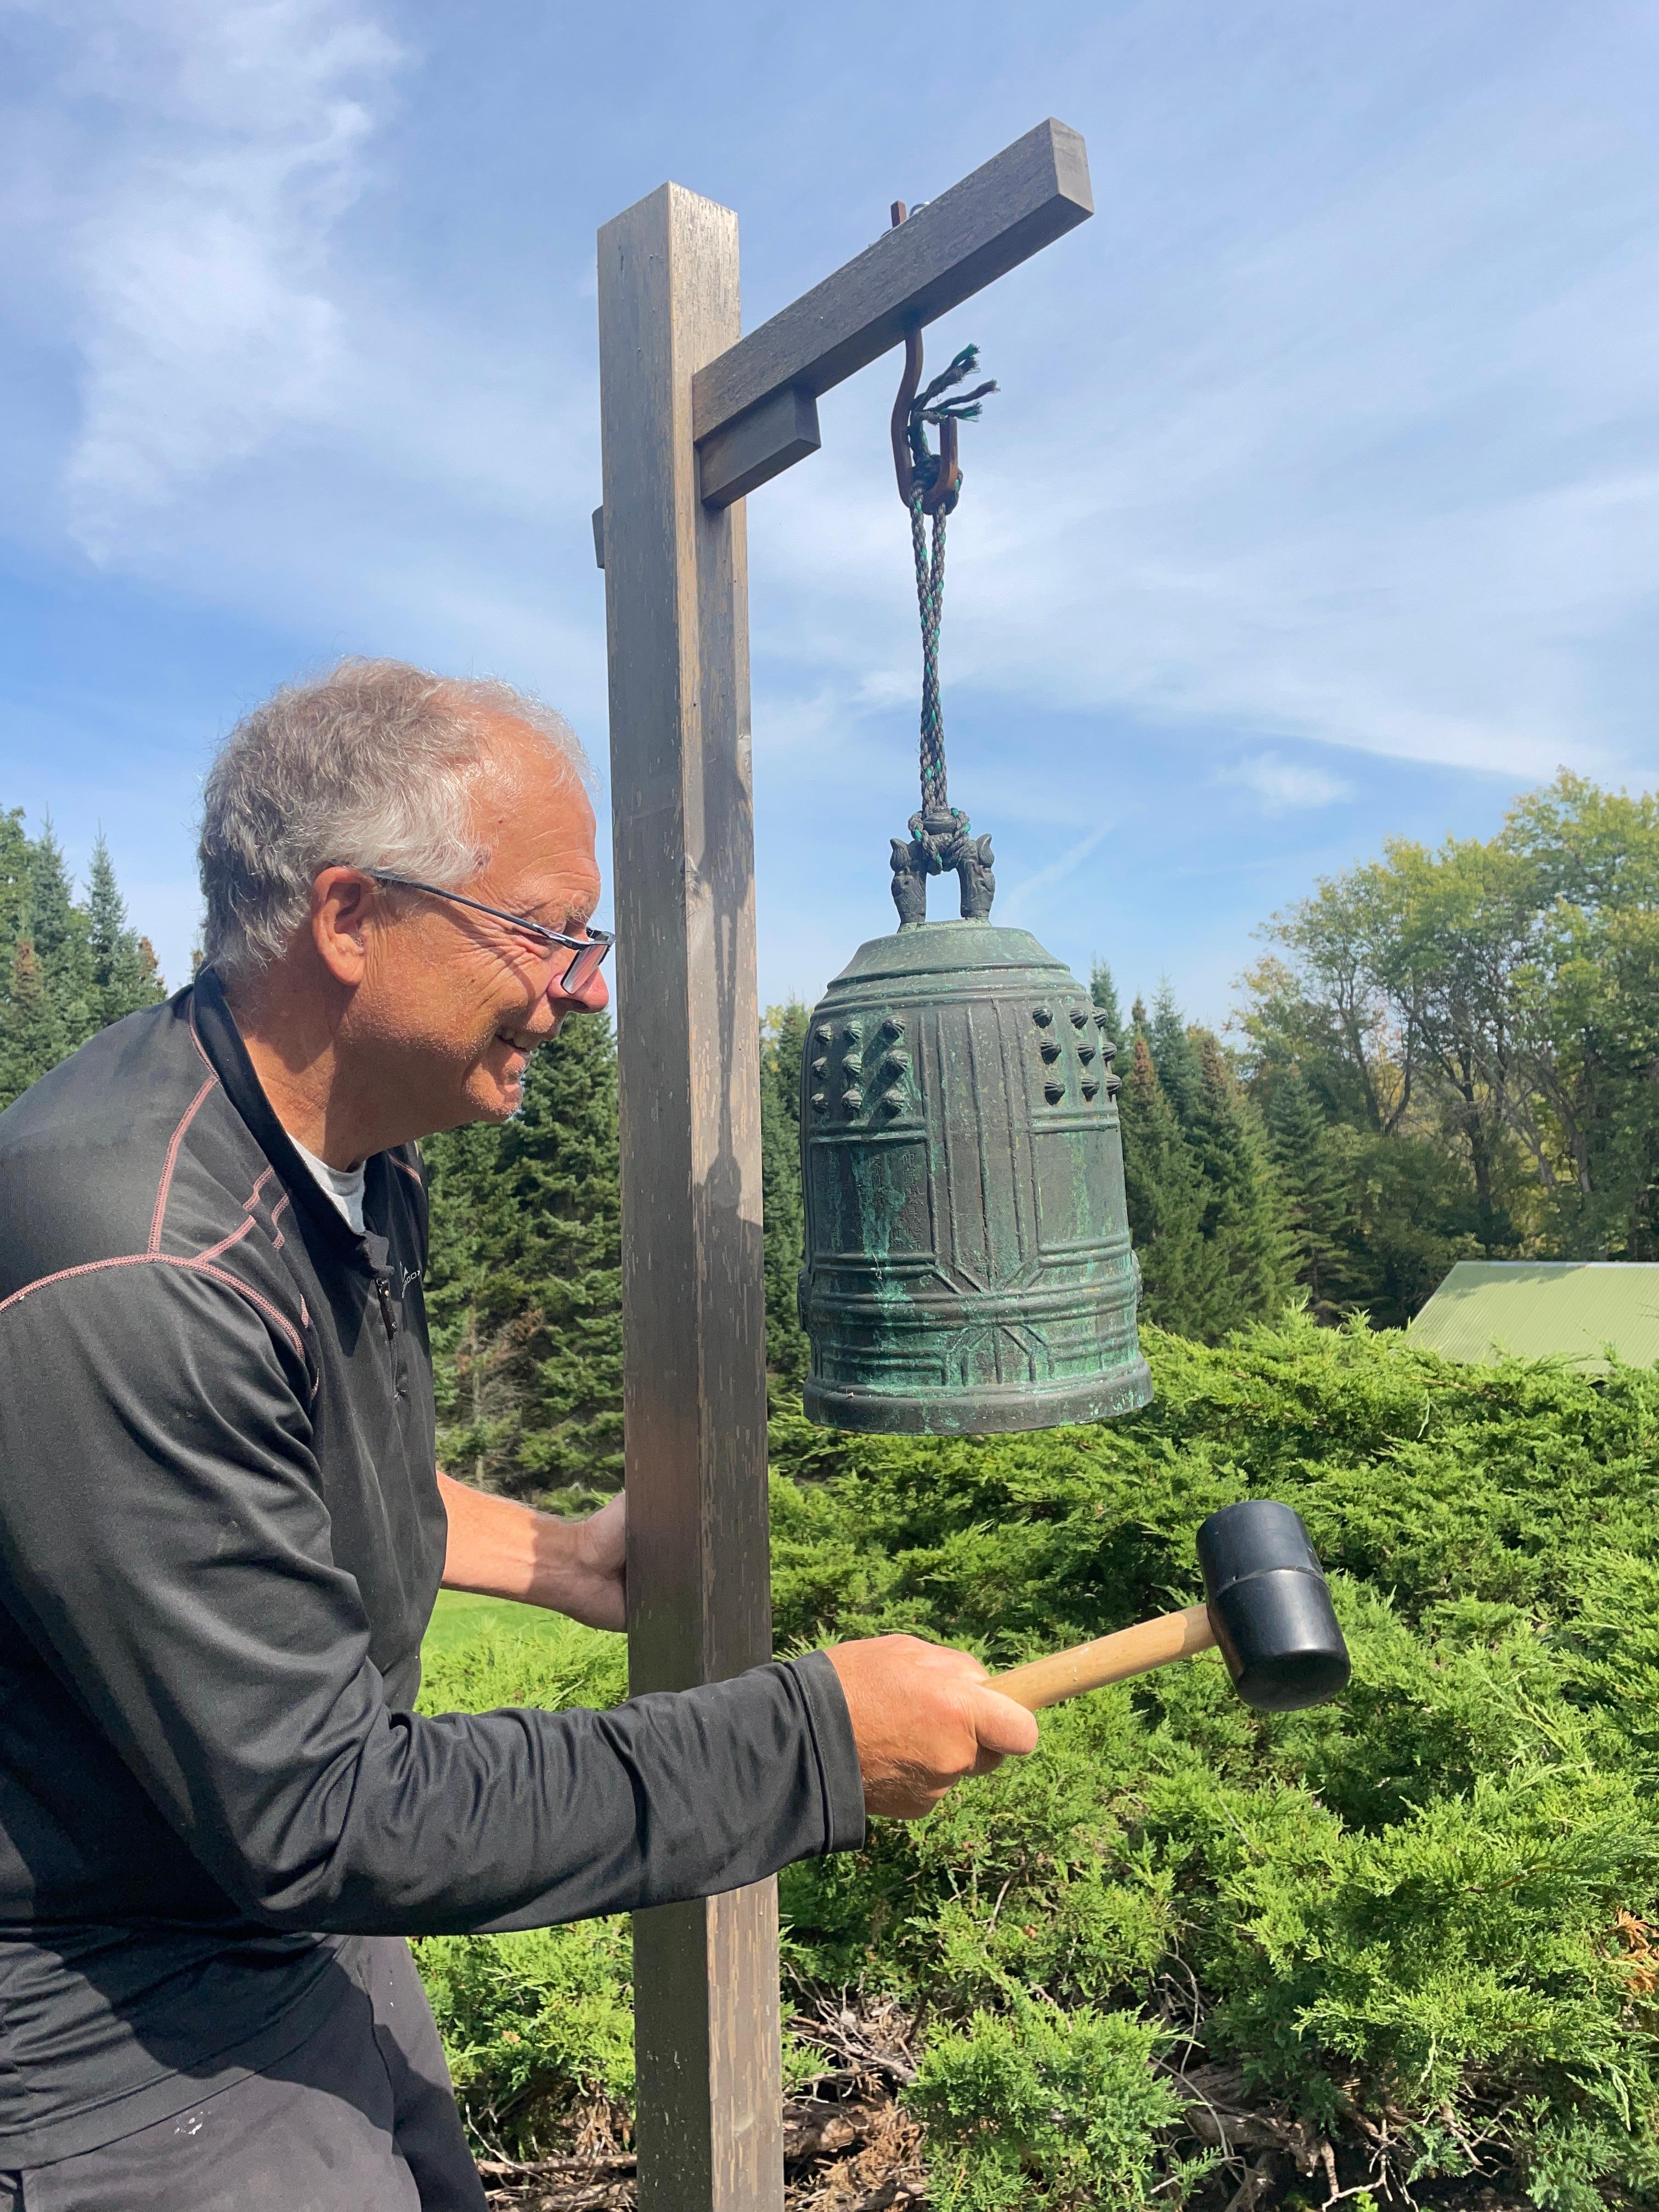 For your special garden setting or indoor display space.

Big Hand Cast Bronze Bell  Bold pleasing sound

Rare one-of-a-kind kanji signatures of patrons.

Beautiful deep resonating ring tones await the new owner of this big one-of-a-kind vintage